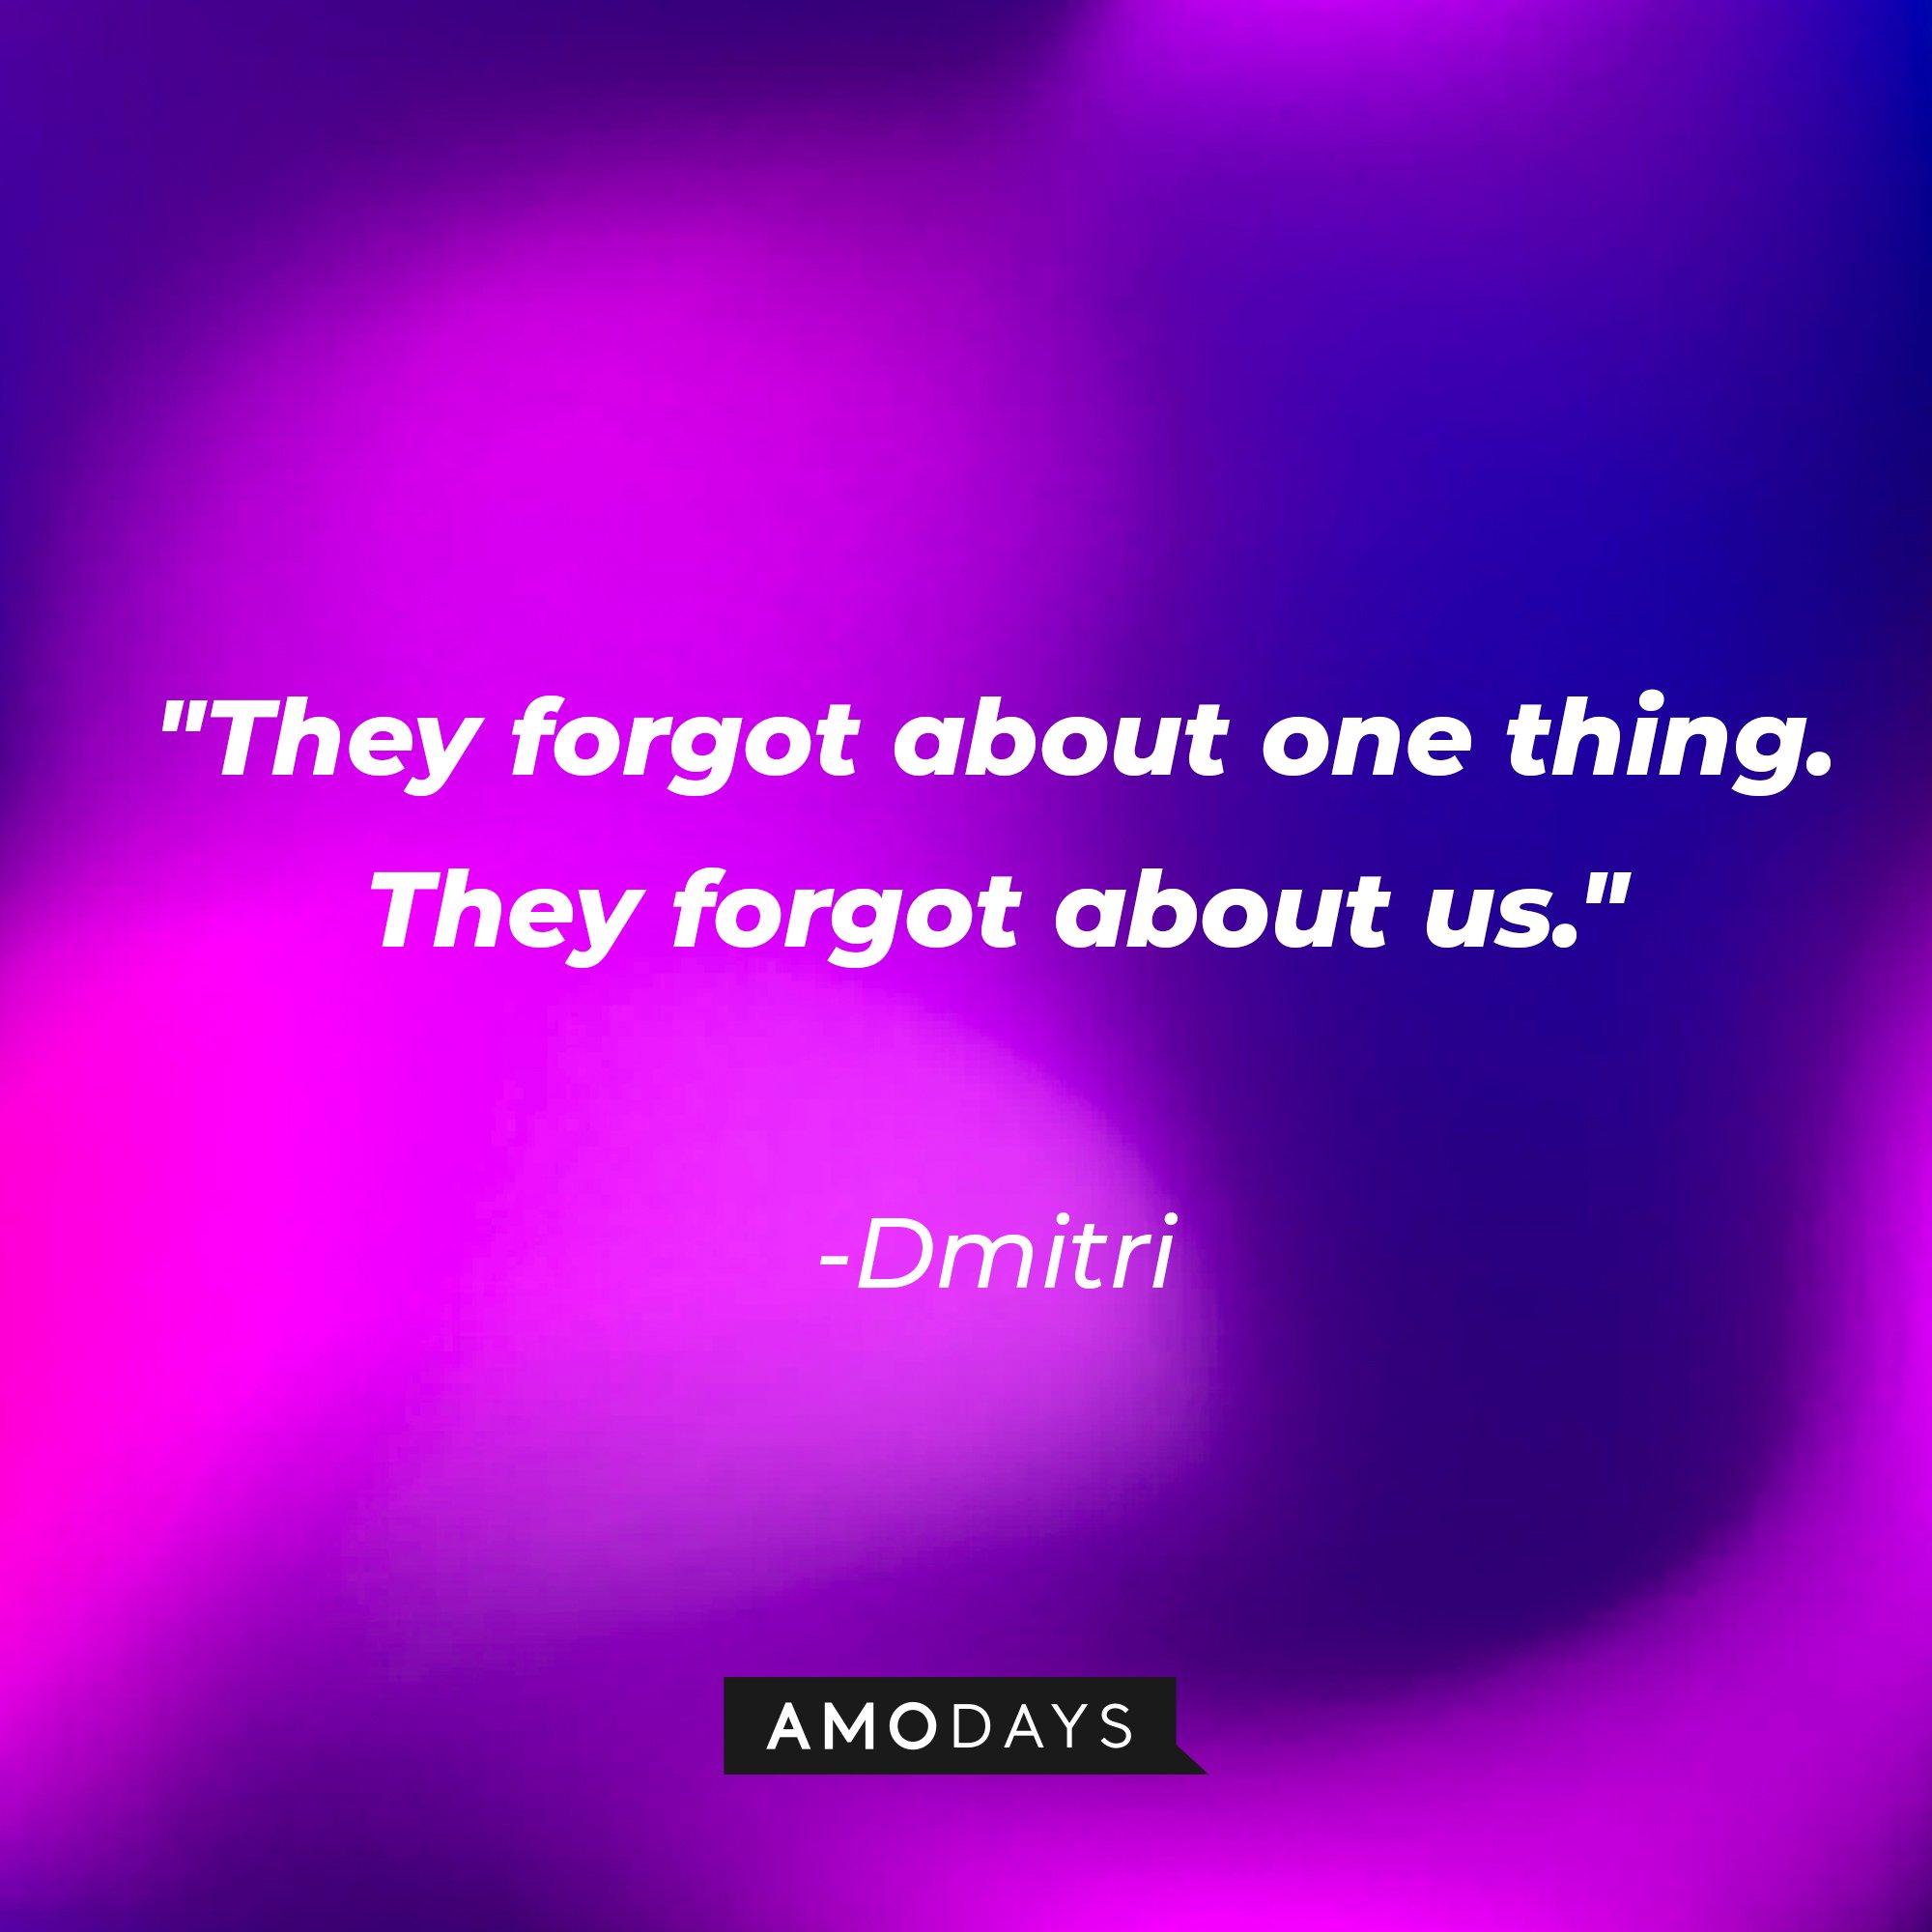 Dmitri’s quote: "They forgot about one thing. They forgot about us." | Image: AmoDays  